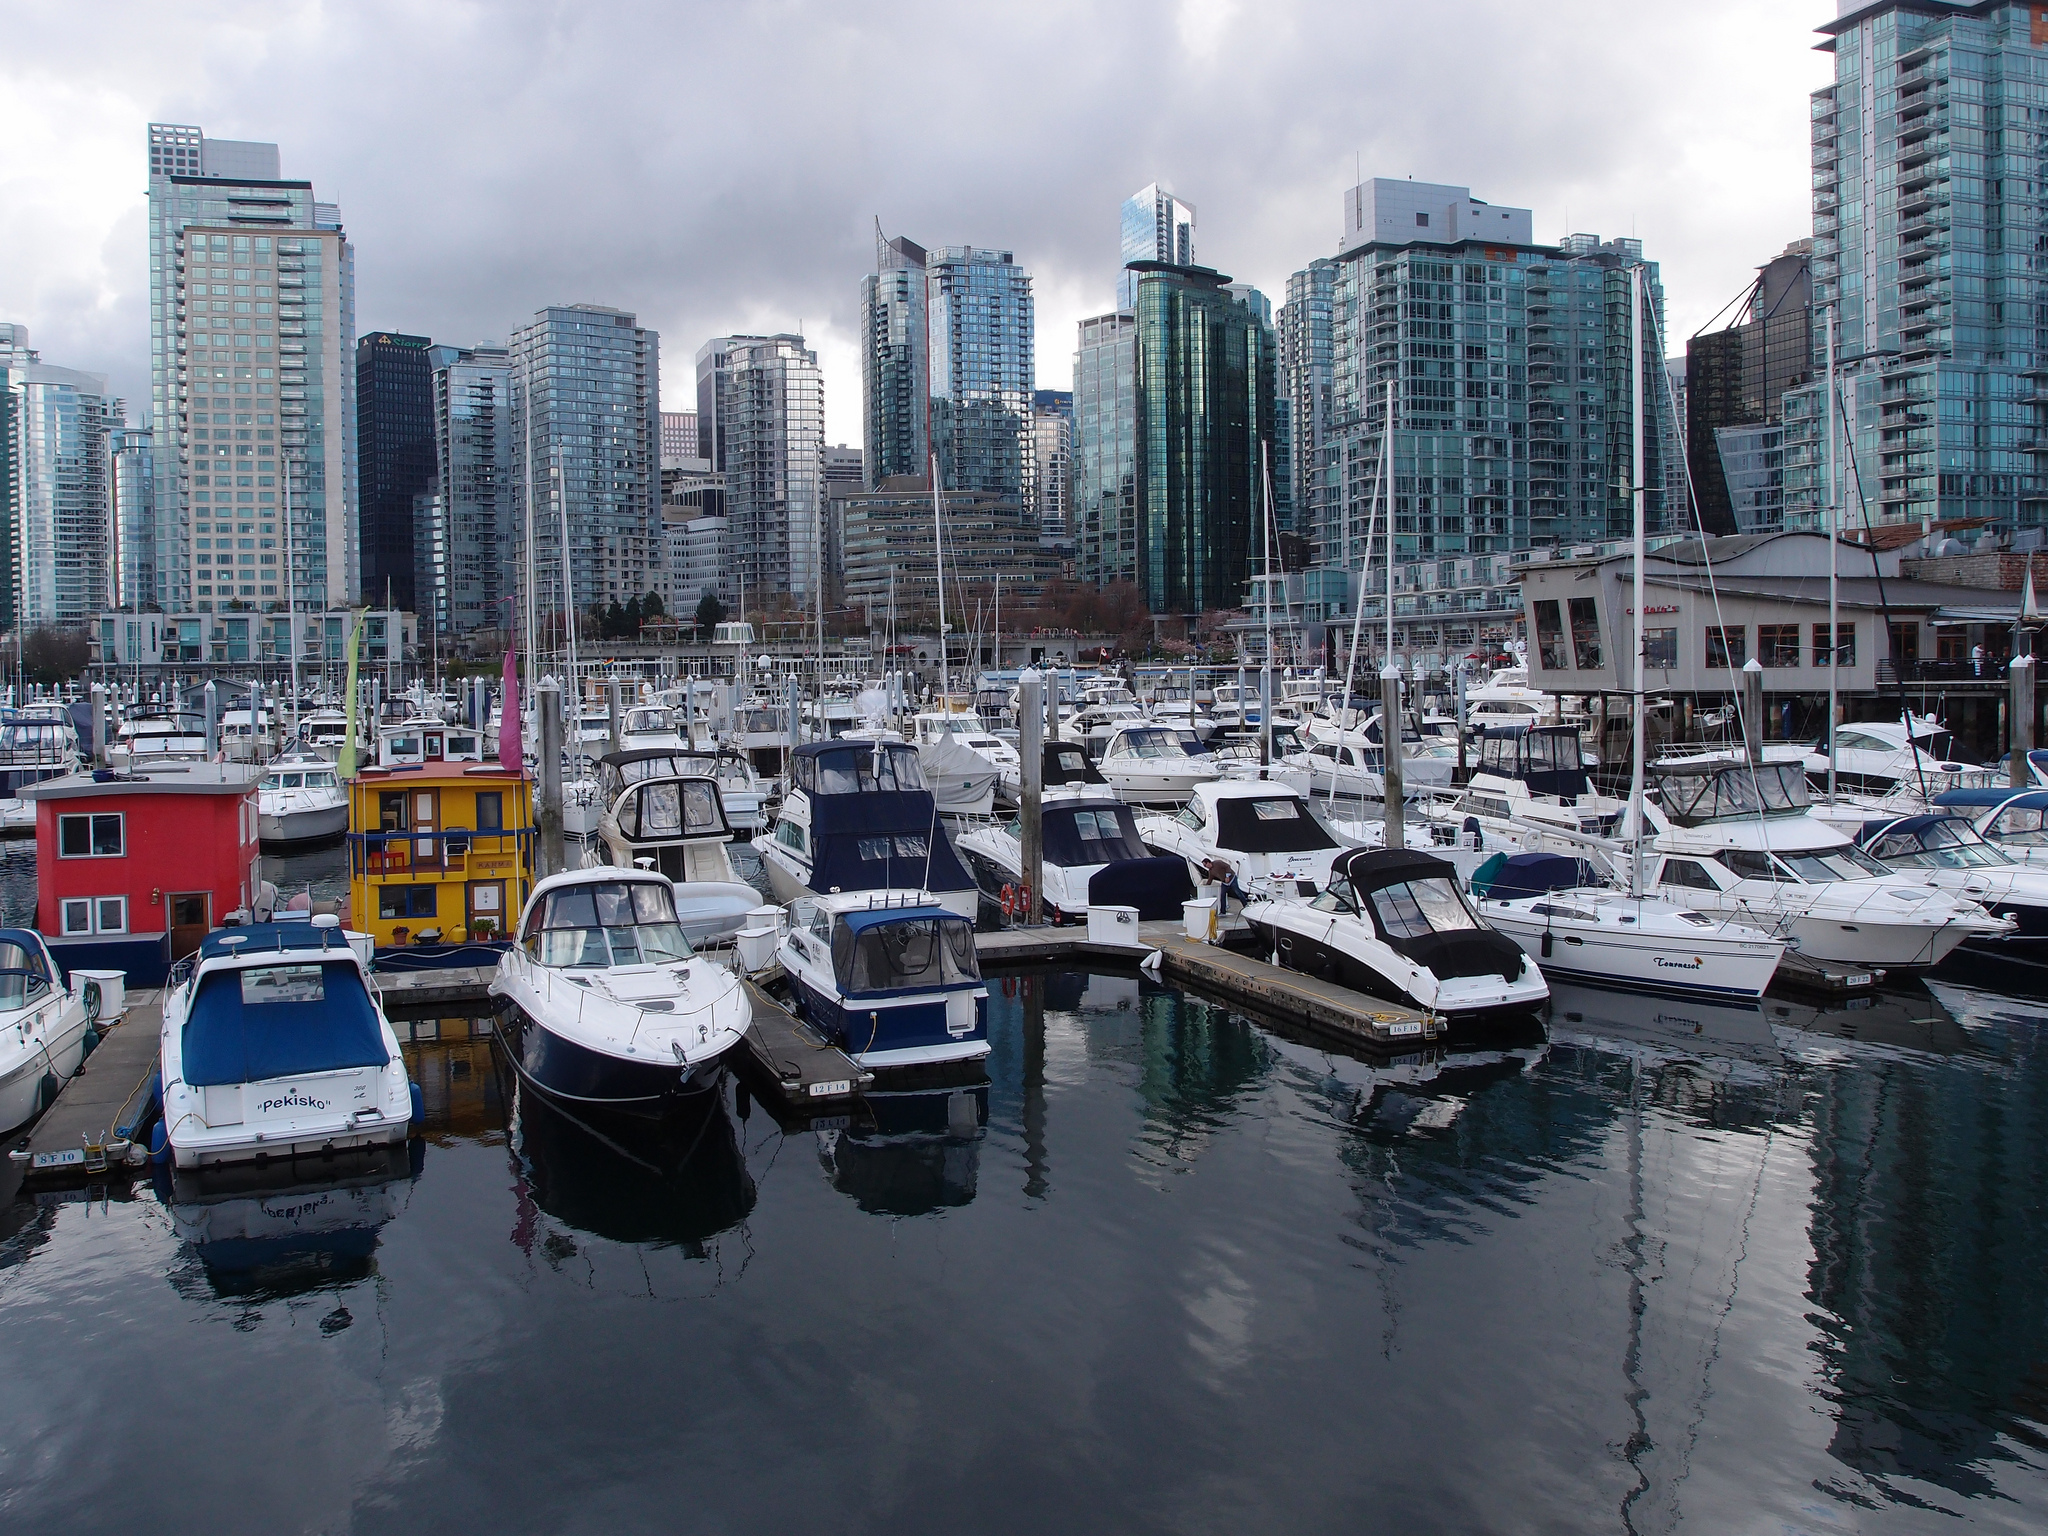 Coal Harbour Marina in Vancouver, BC